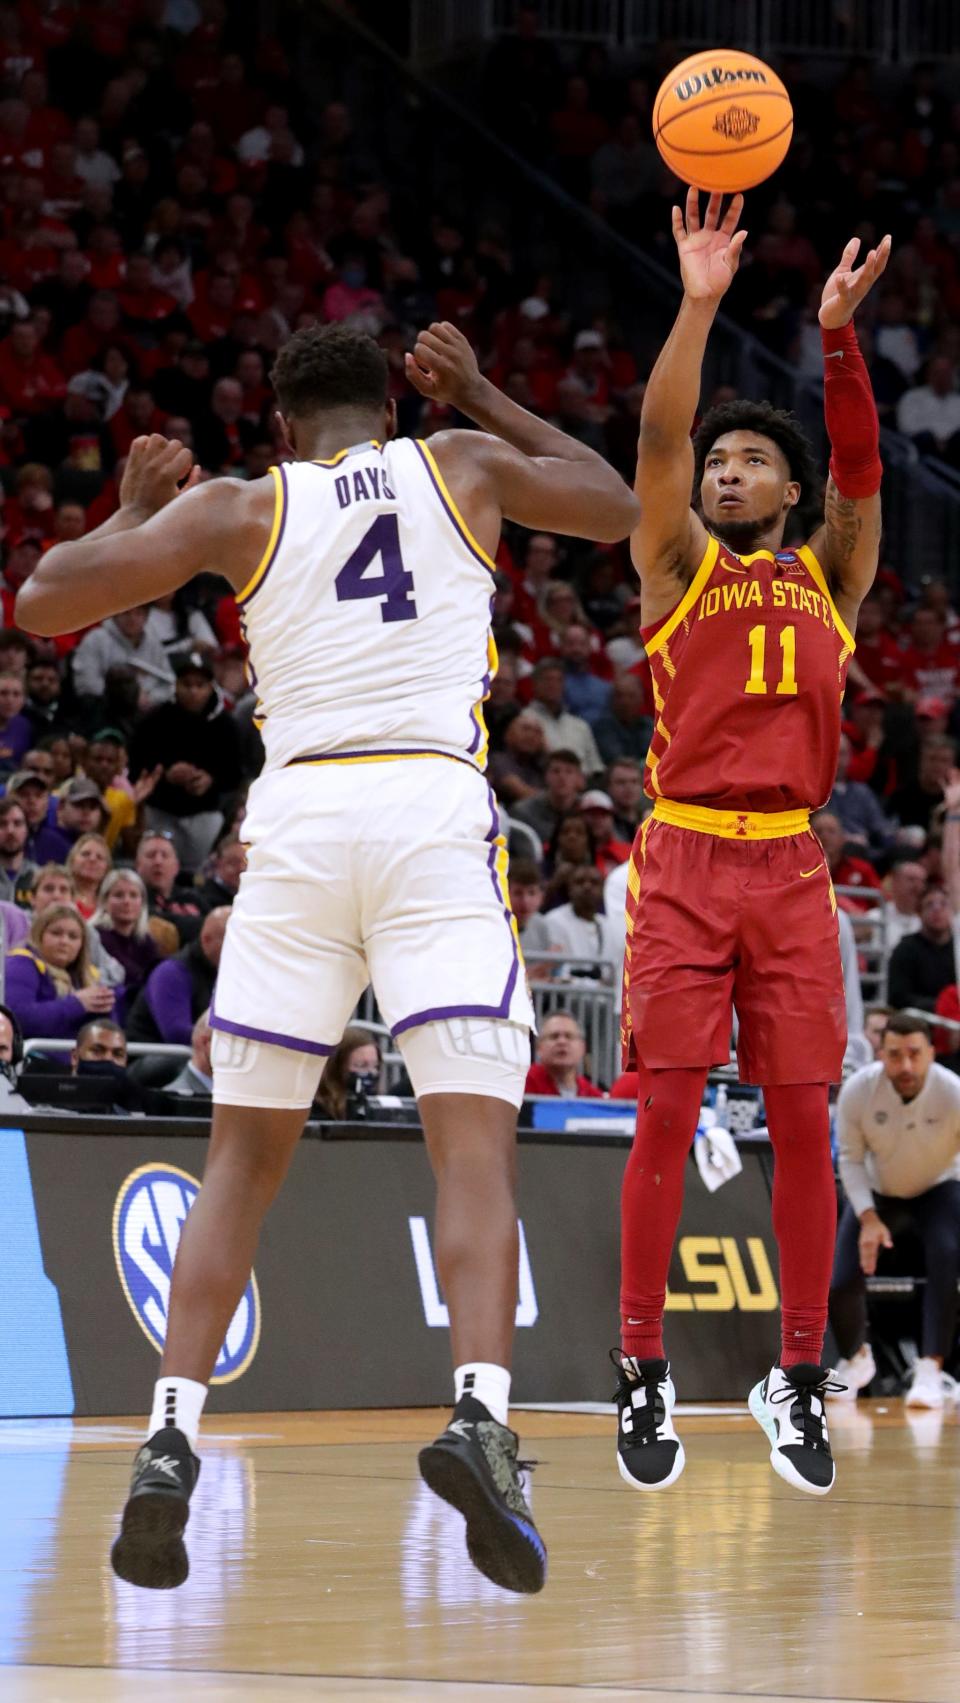 Iowa State guard Tyrese Hunter (11) hits a threepoiubnt basket during the second half in the first round game of the 2022 NCAA Men's Basketball Tournament Friday, March 18, 2022 at Fiserv Forum in Milwaukee, Wis. Iowa State beat LSU 59-54.